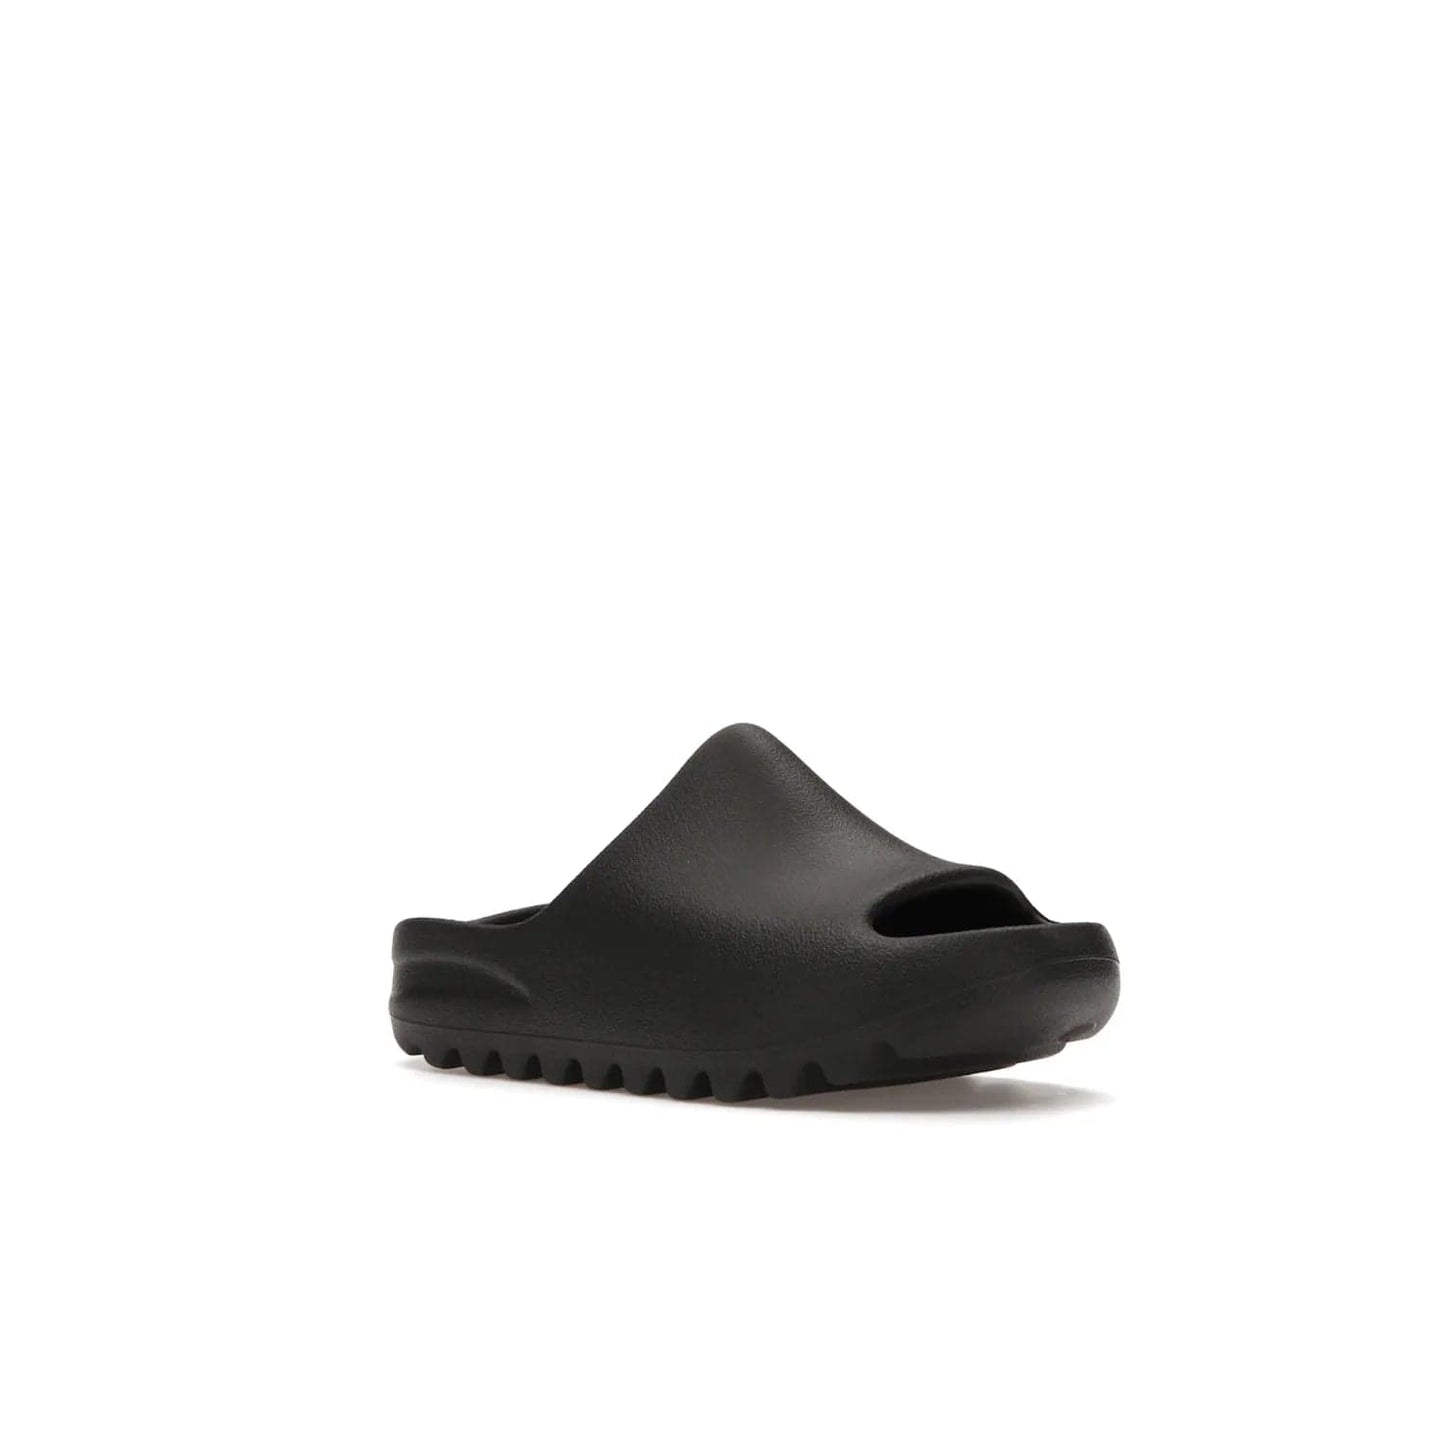 adidas Yeezy Slide Onyx (Kids) - Image 5 - Only at www.BallersClubKickz.com - adidas Yeezy Slide Onyx (Kids): Comfortable foam construction with textured surface and iconic three-stripe logo. Breathable, open-toe design and deep grooves for traction. Released in March 2021 at $50.